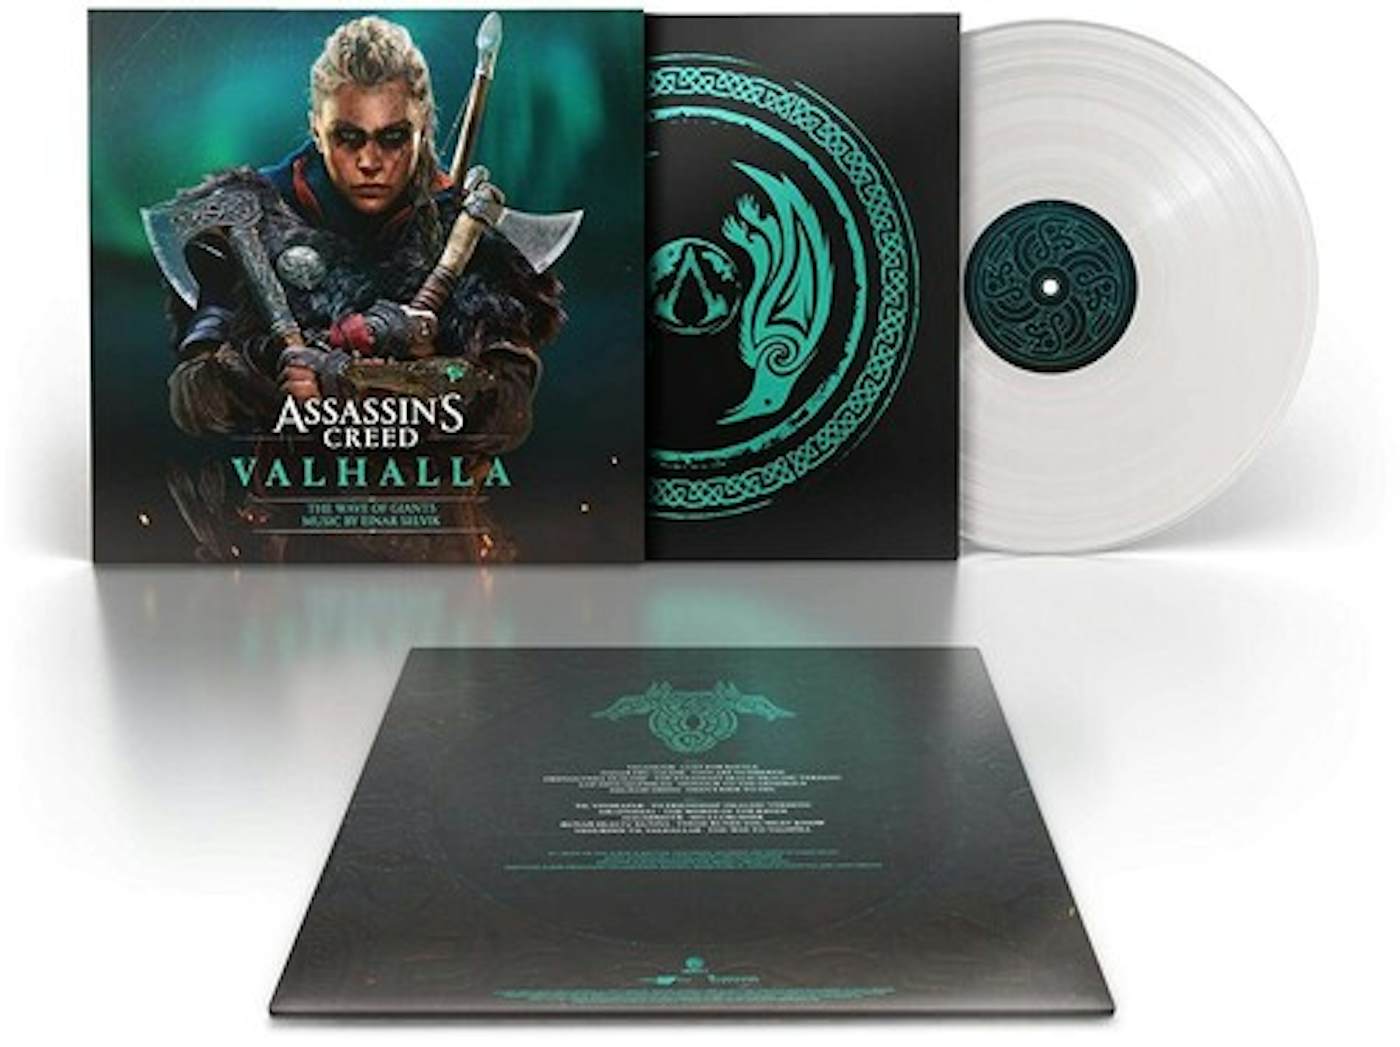 Assassin's Creed Valhalla (Original Game Soundtrack) - Red W /Yellow S